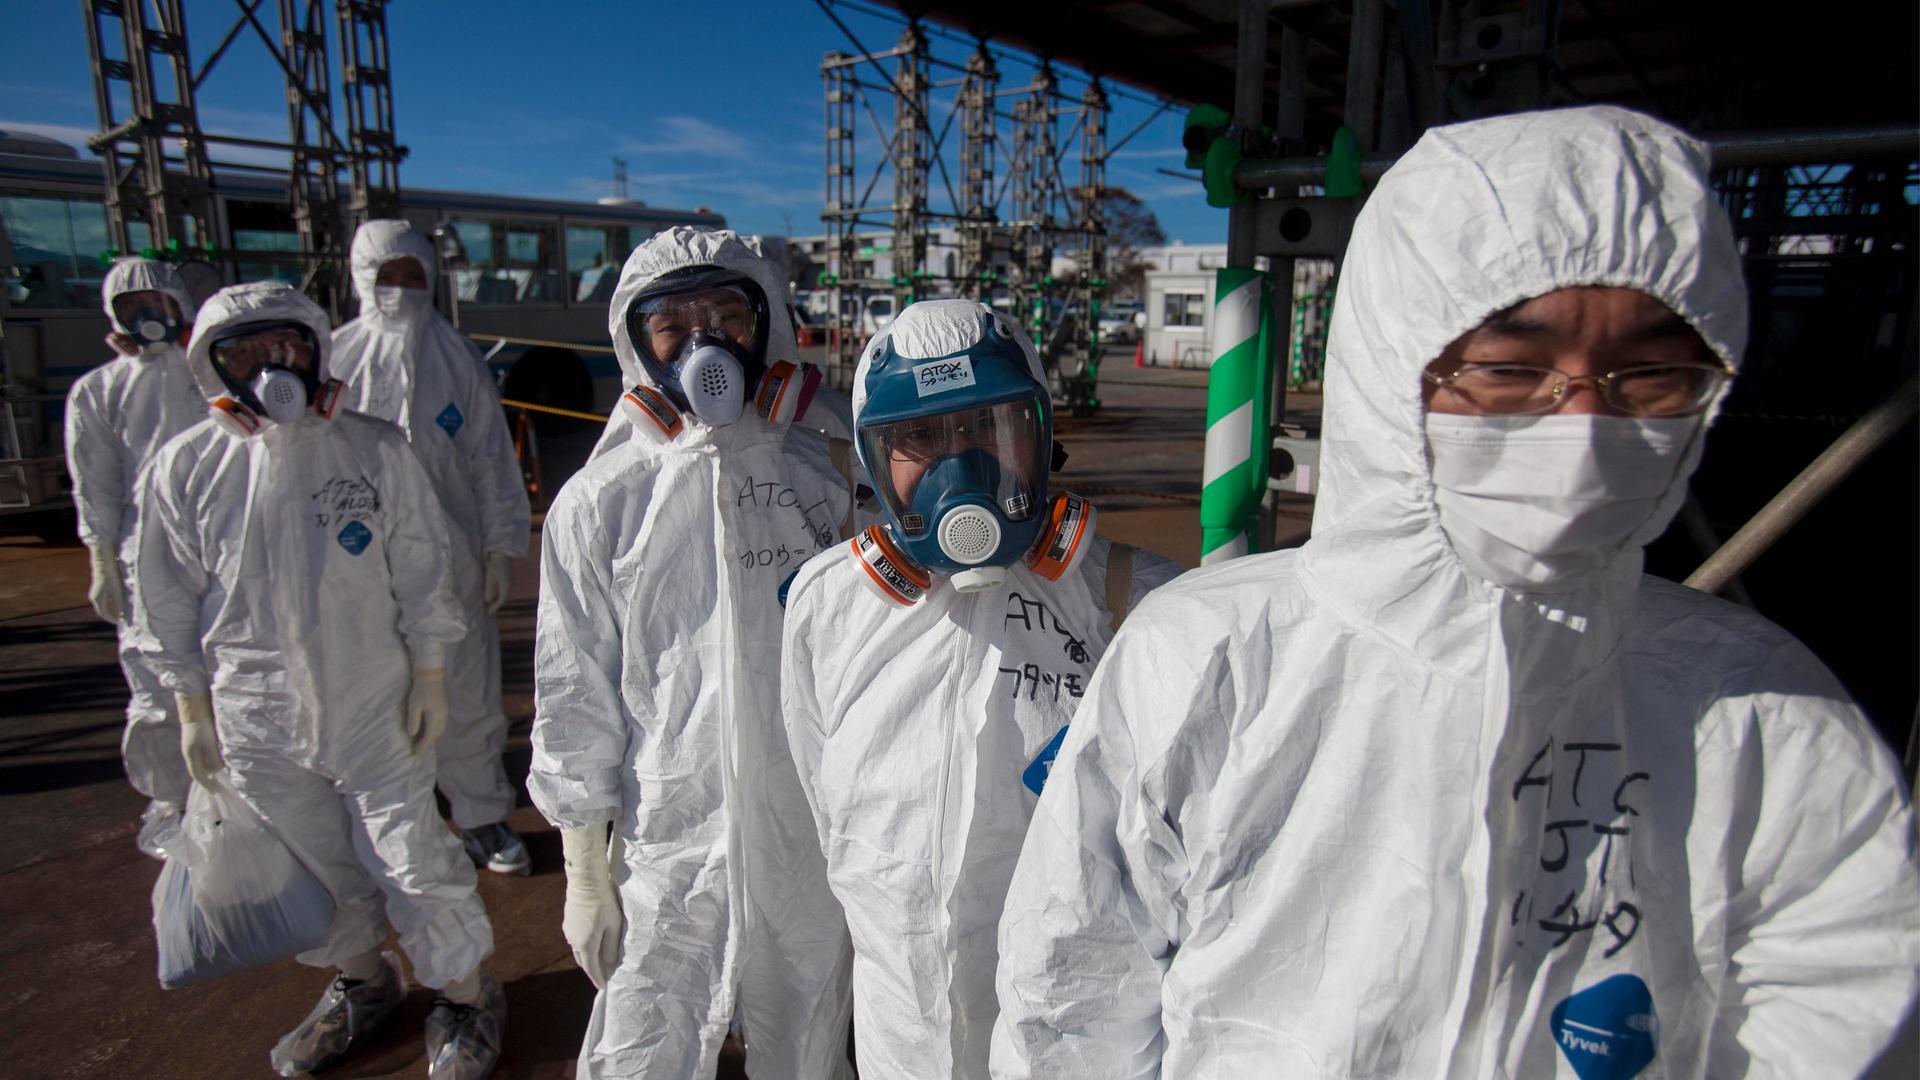 In this Nov. 12, 2011 file photo, workers in protective suits and masks wait to enter the emergency operation center at the crippled Fukushima Daiichi nuclear power station in Okuma, Japan.